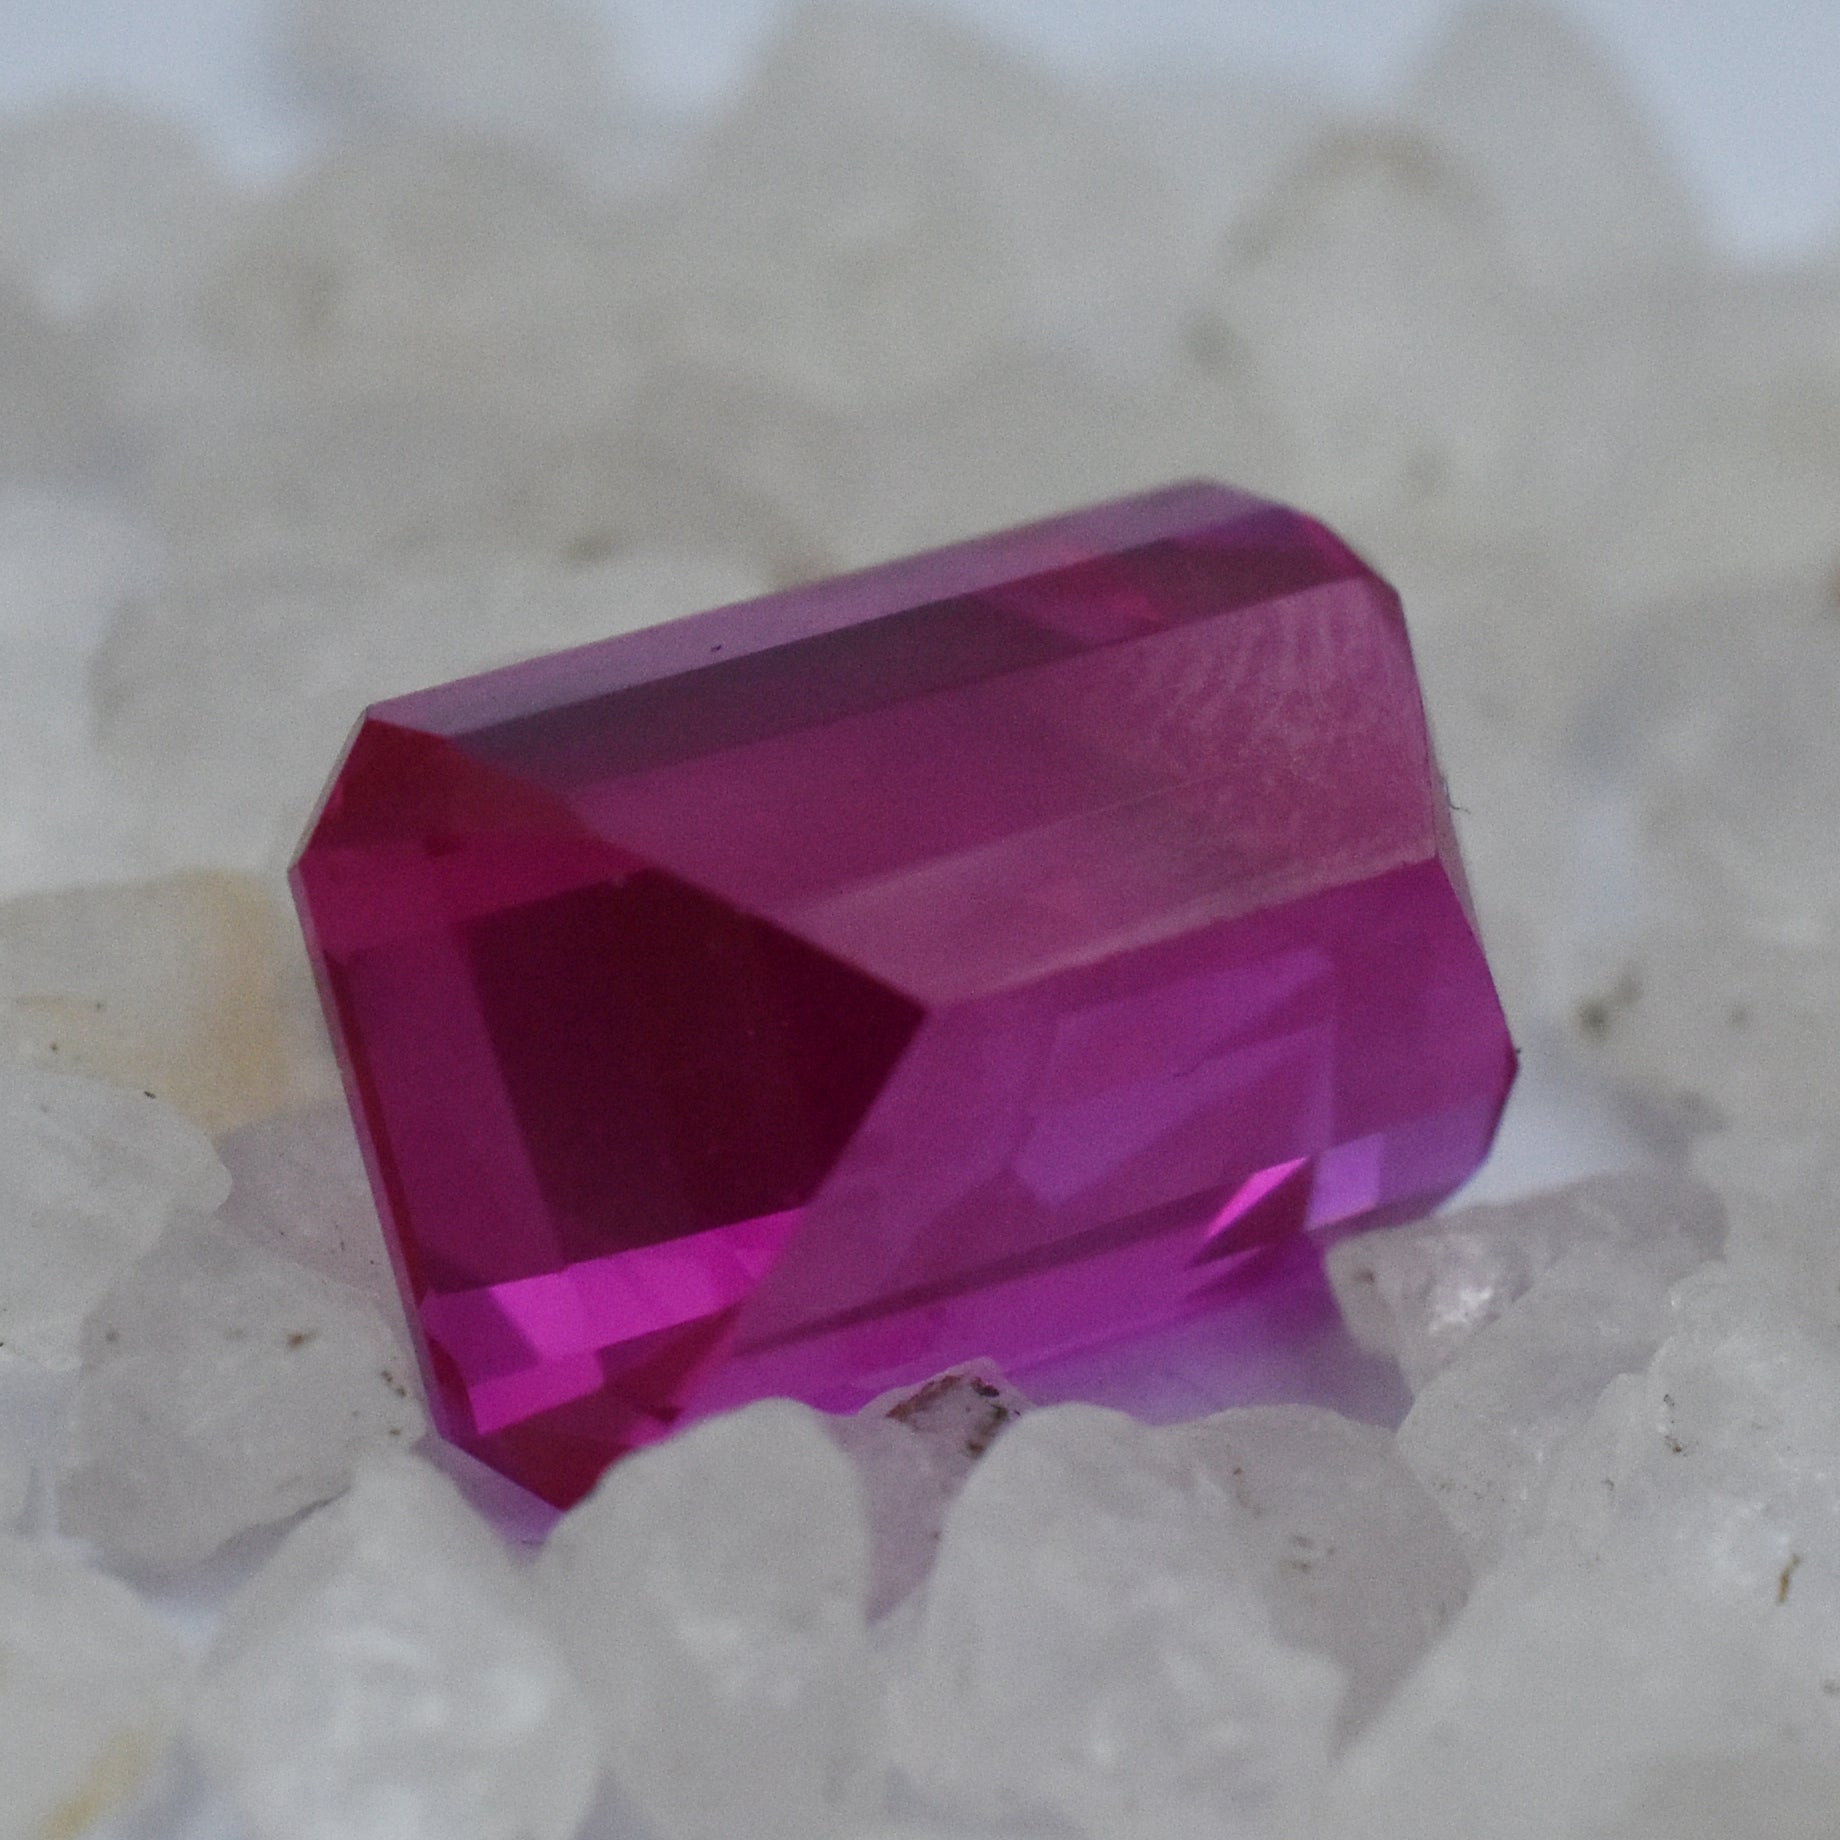 Faceted 20.15 Ct Natural Ruby Burma Pink Ruby Emerald Cut Certified Loose Gemstone Jewelry Accessory/Gift Gem